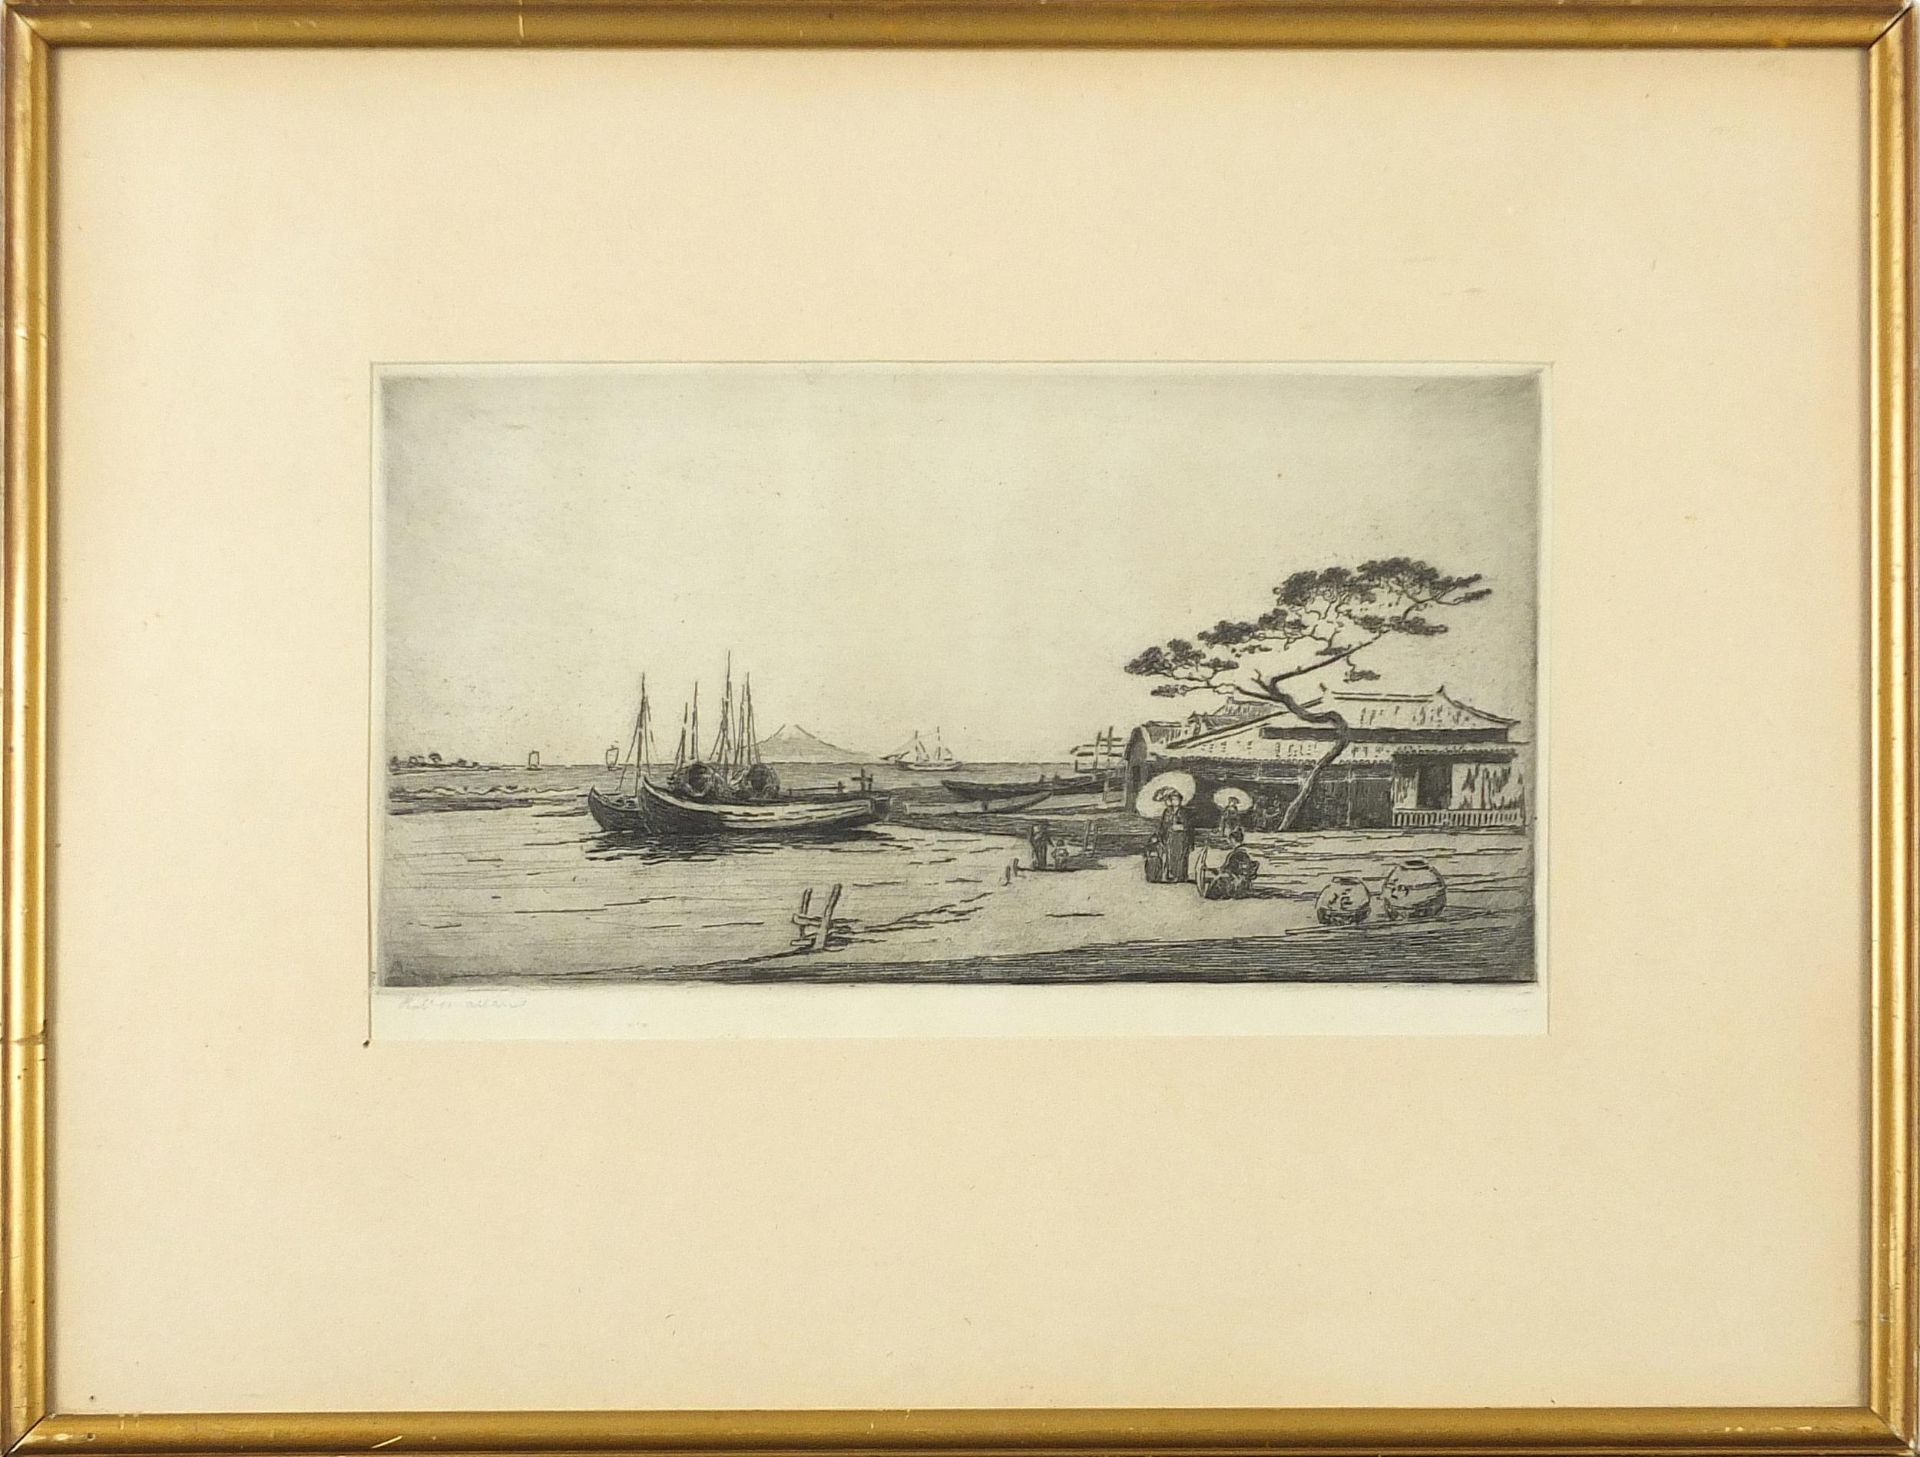 Robert W Allan - Females wearing kimonos before boats, pencil signed print, mounted, framed and - Image 2 of 5